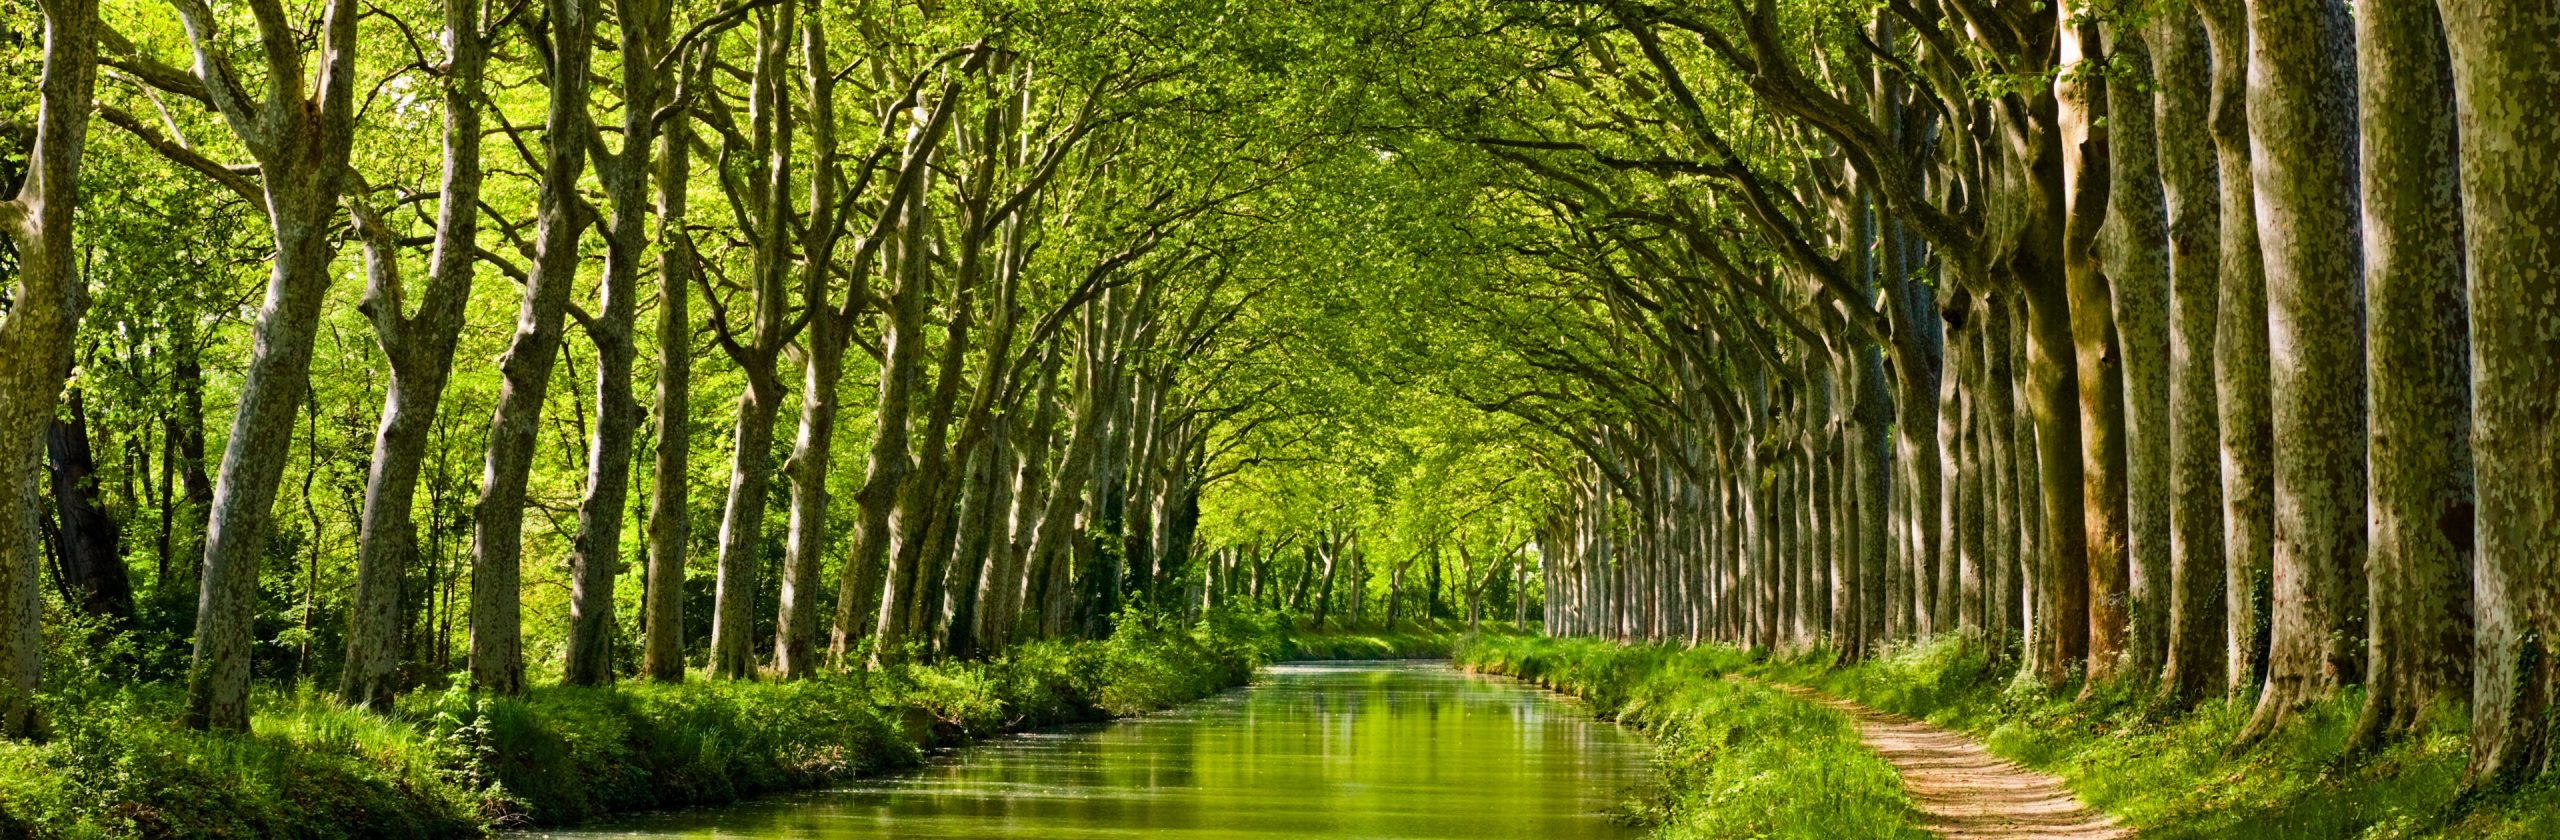 Canal du midi by bicycle